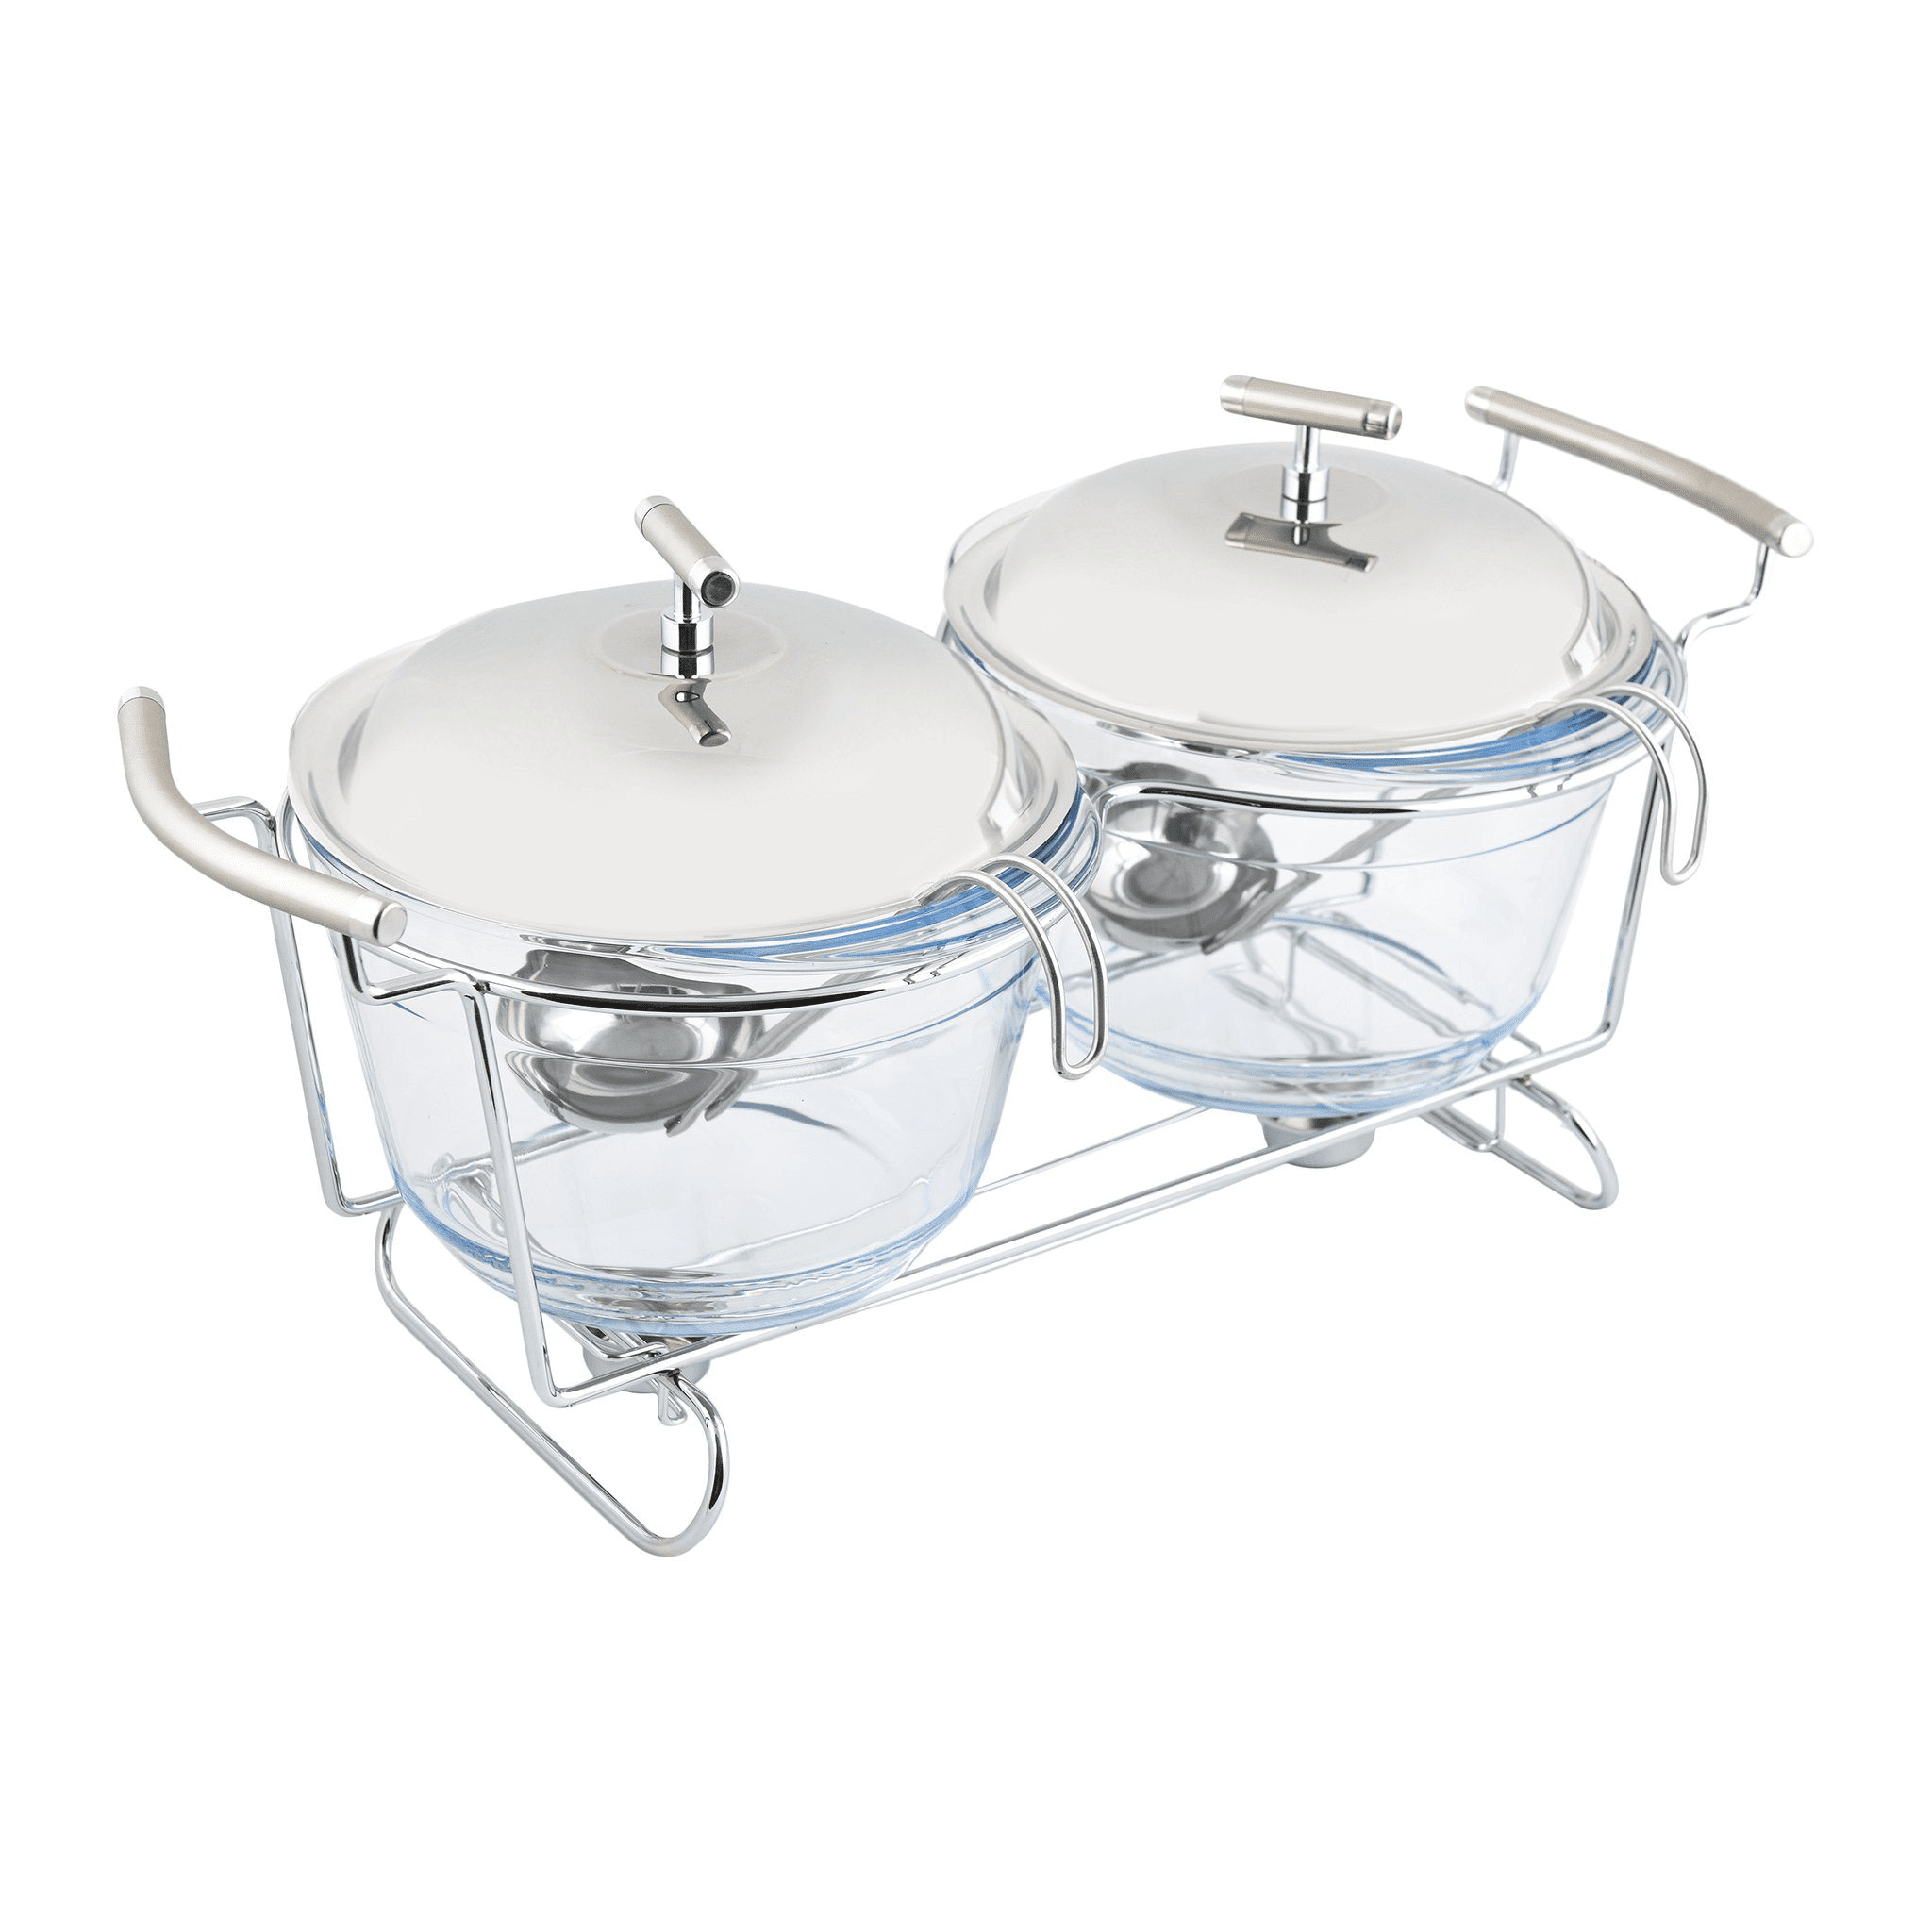 2 Round Soup Warmers with 2 Ladles - Stainless Steel 18/10 & Tempered Glass - 2x4.0 Lit - 8000119